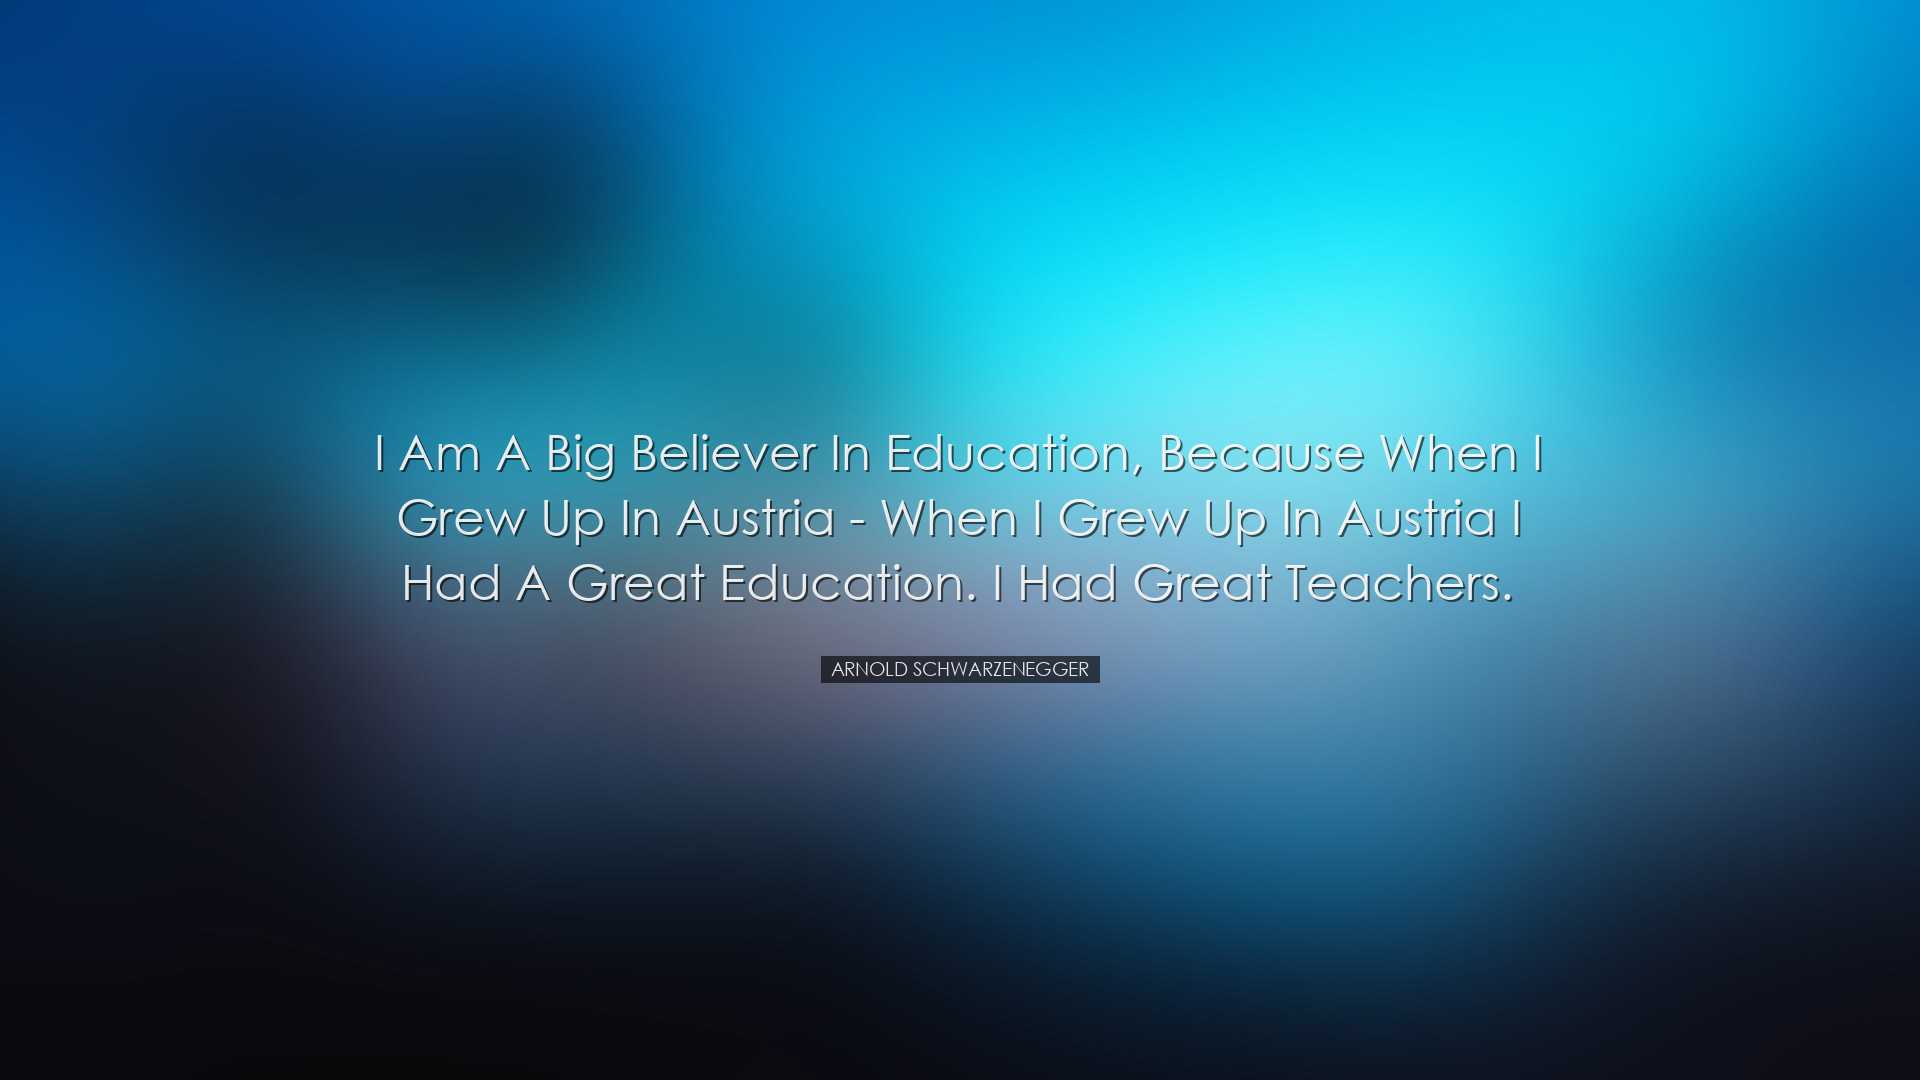 I am a big believer in education, because when I grew up in Austri